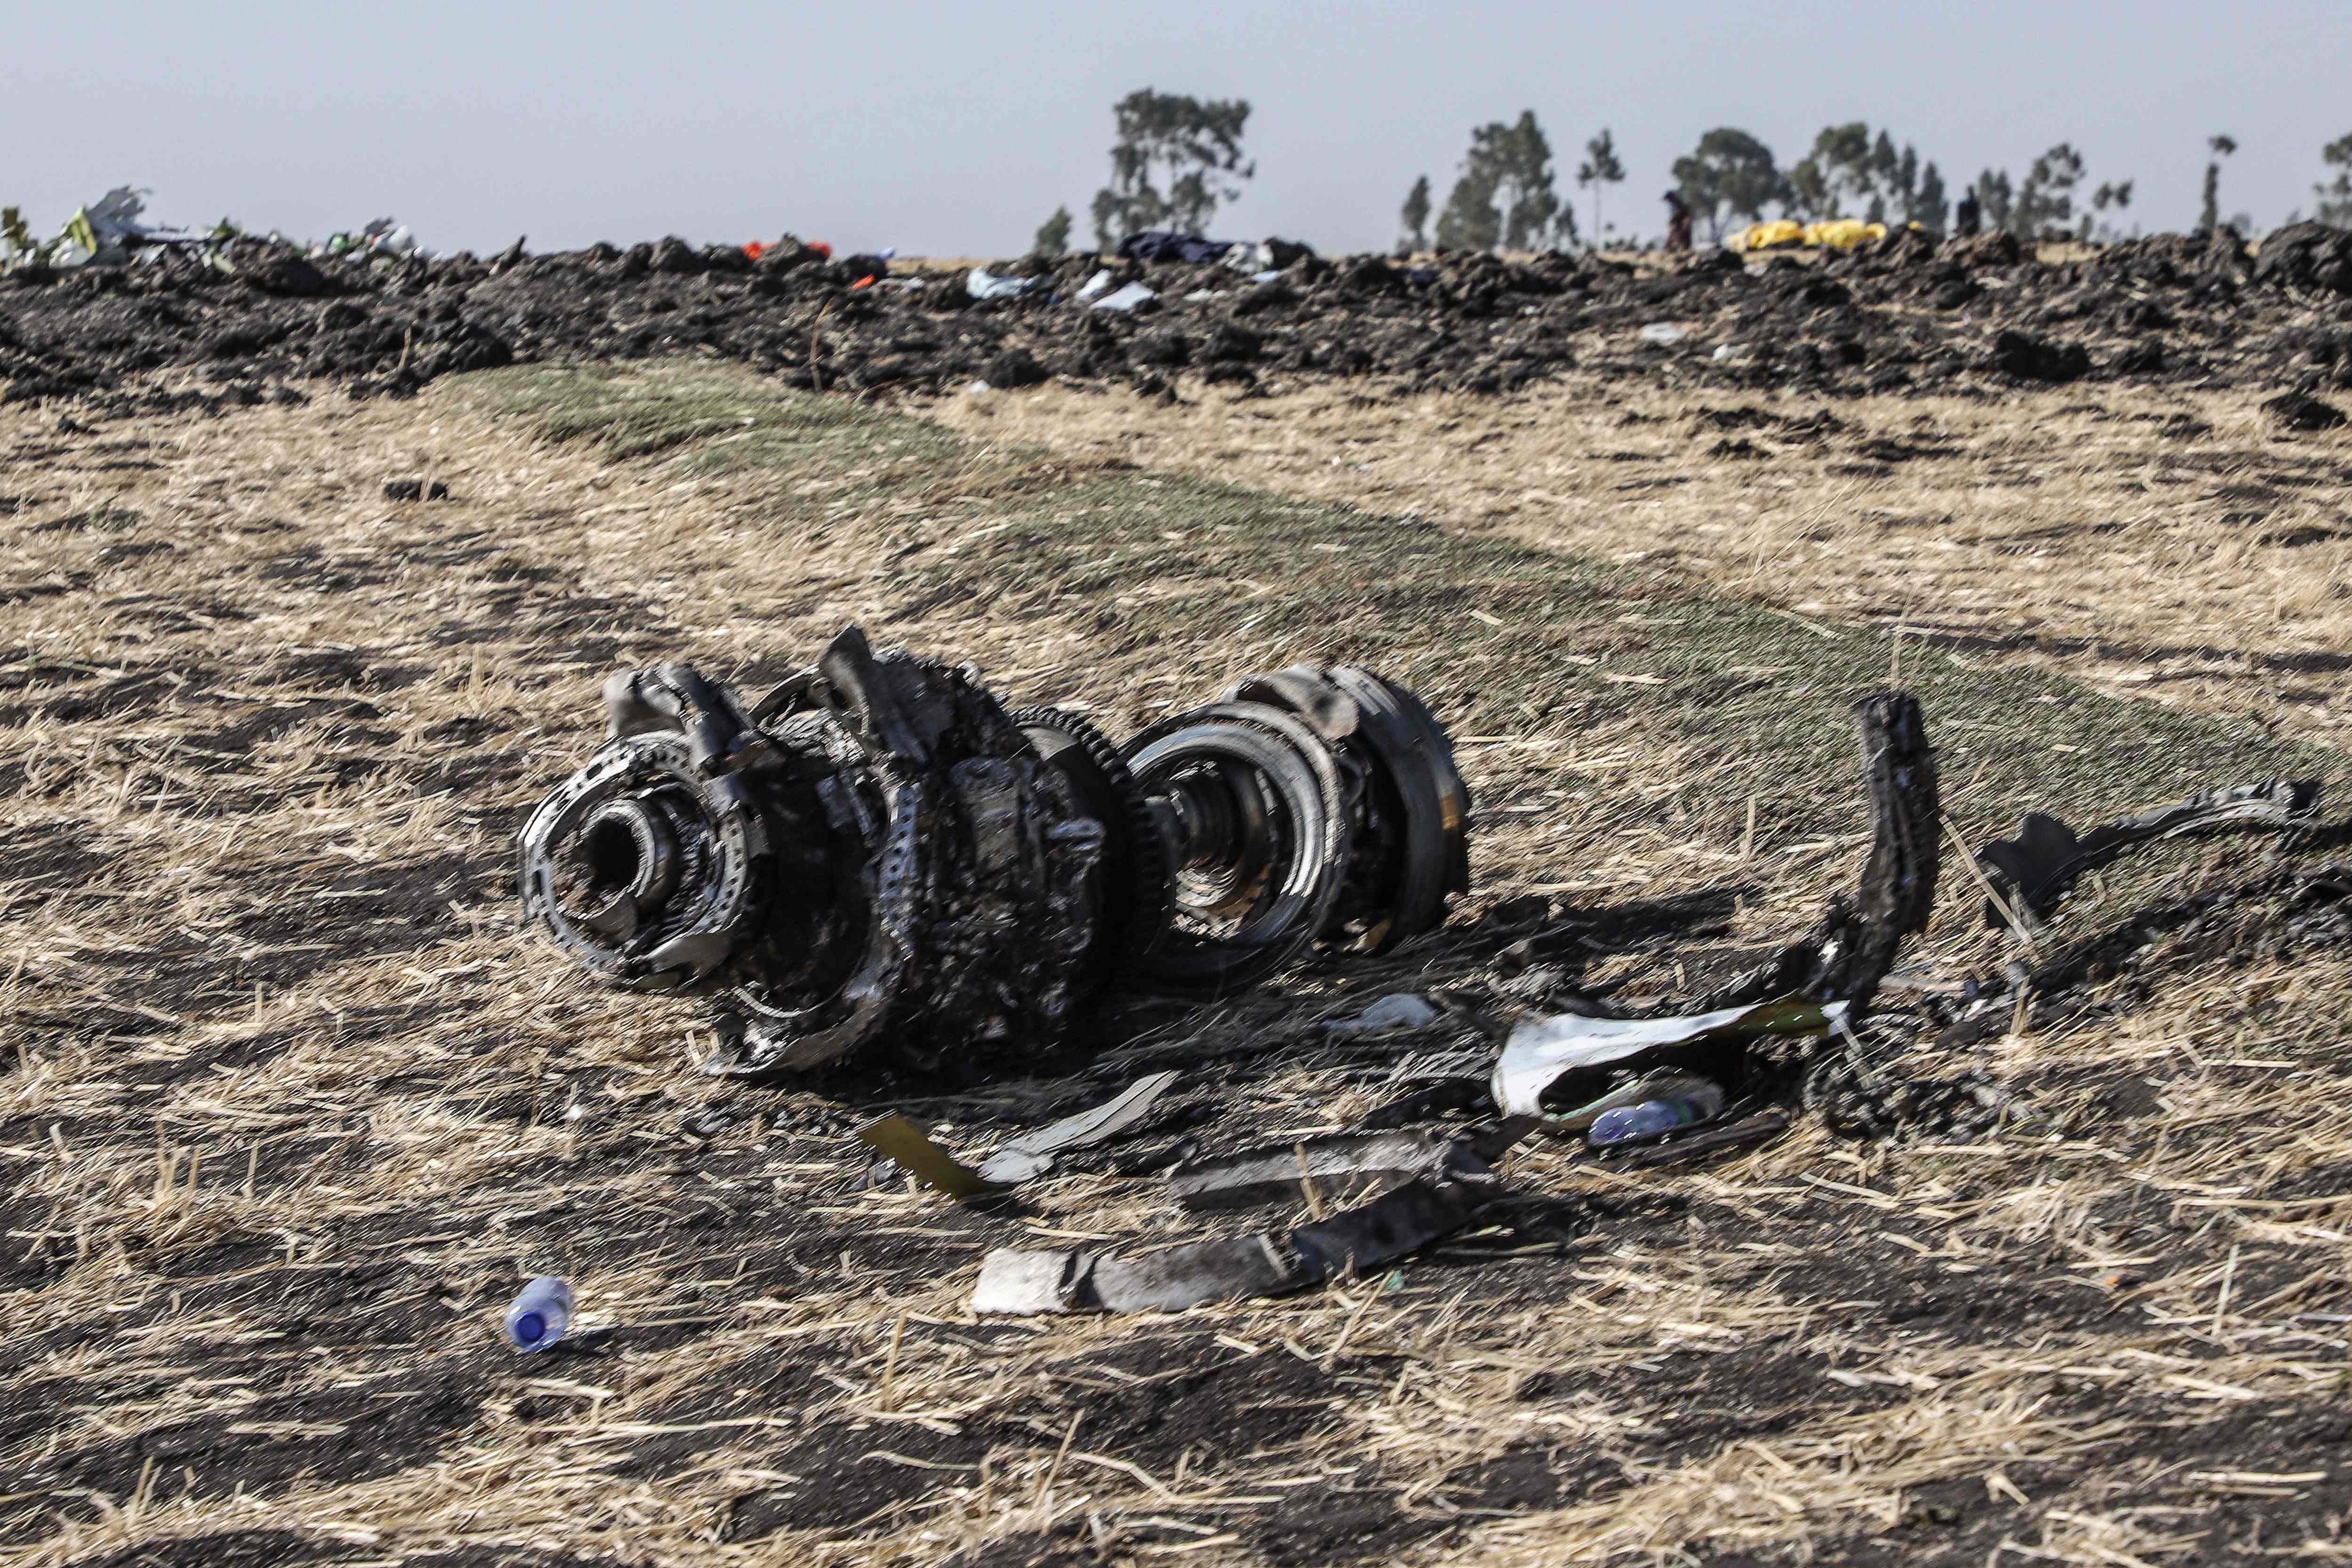 Debris of Ethiopia Airlines’ ill-fated Flight ET302, which crashed near Bishoftu, 60 kilometres southeast of Addis Ababa, en route Nairobi in Kenya. Photo: Agence France-Presse